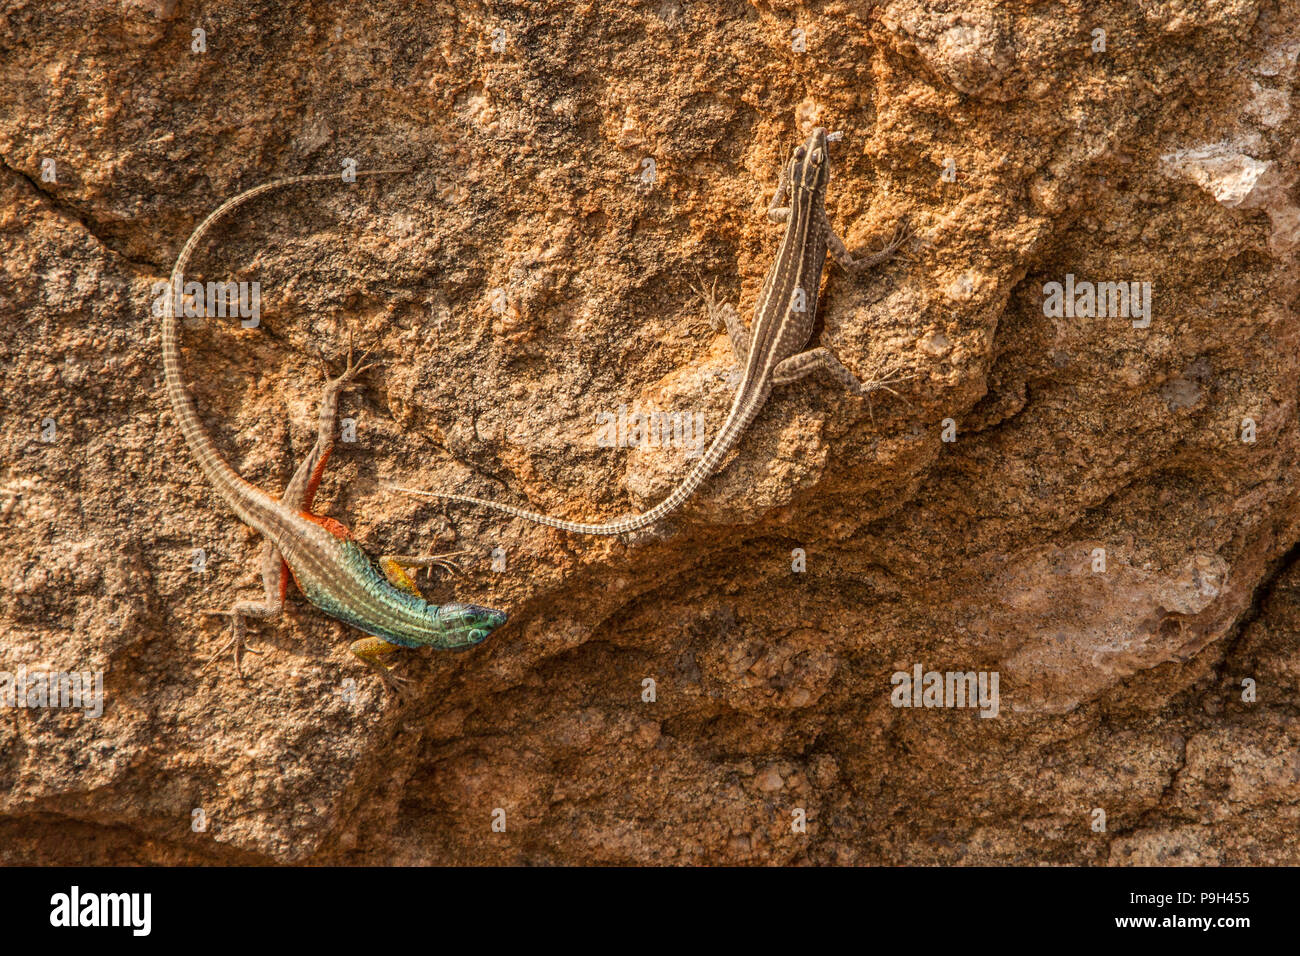 A male and female Augrabies or Broadley's flat lizard - Platysaurus broadleyi - on a rock at Augrabies Falls National Park, South Africa. Stock Photo